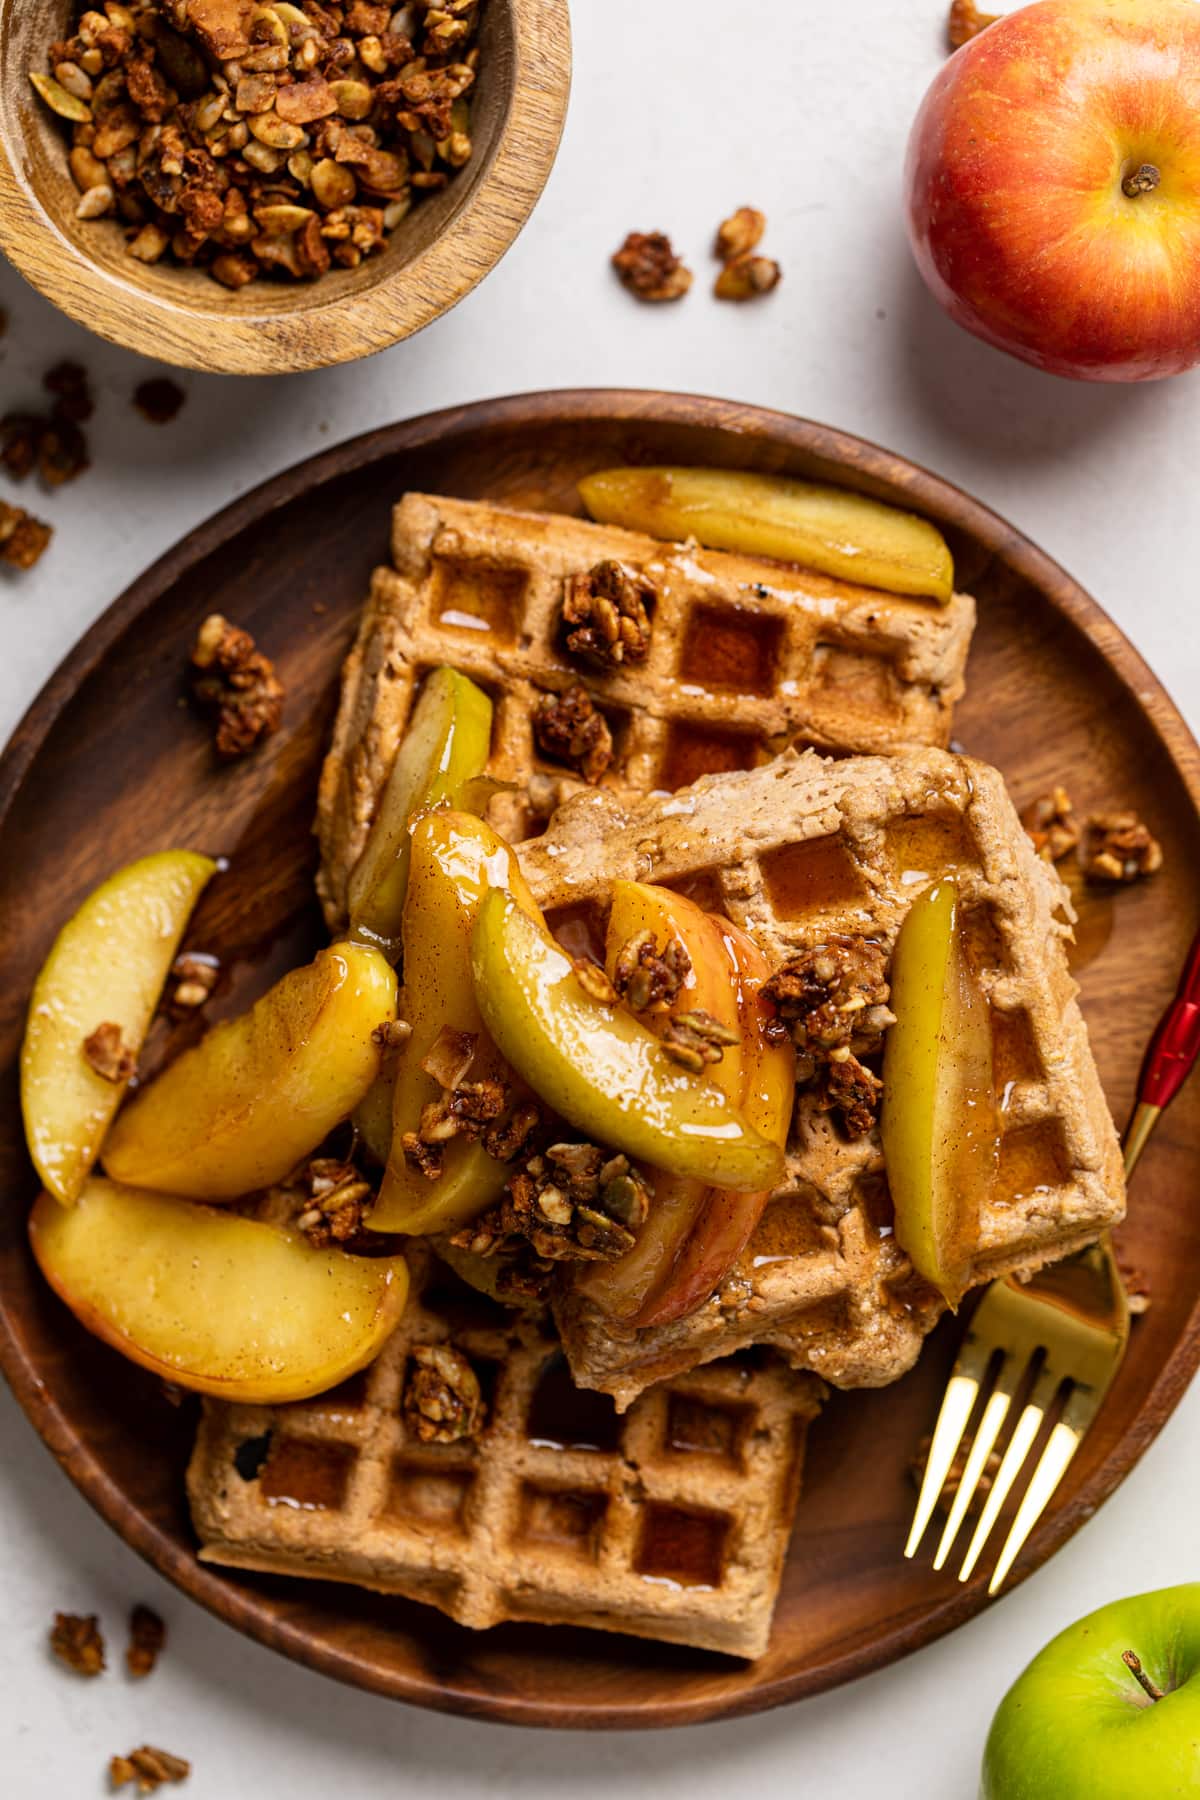 Pile of Apple Spice Cornmeal Waffles topped with caramelized apples and granola